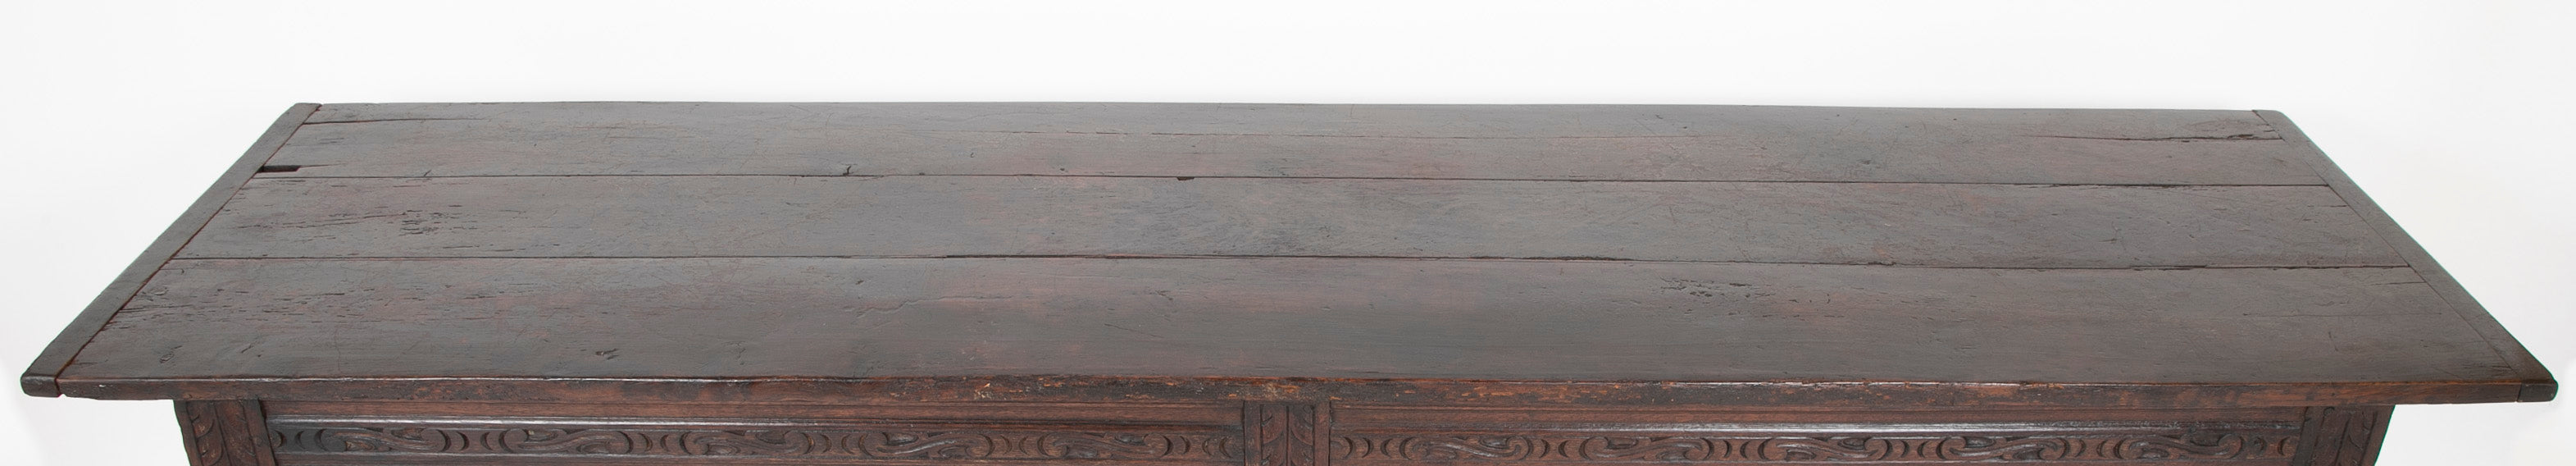 An 18th Century English Oak Refectory Table with Carved Apron